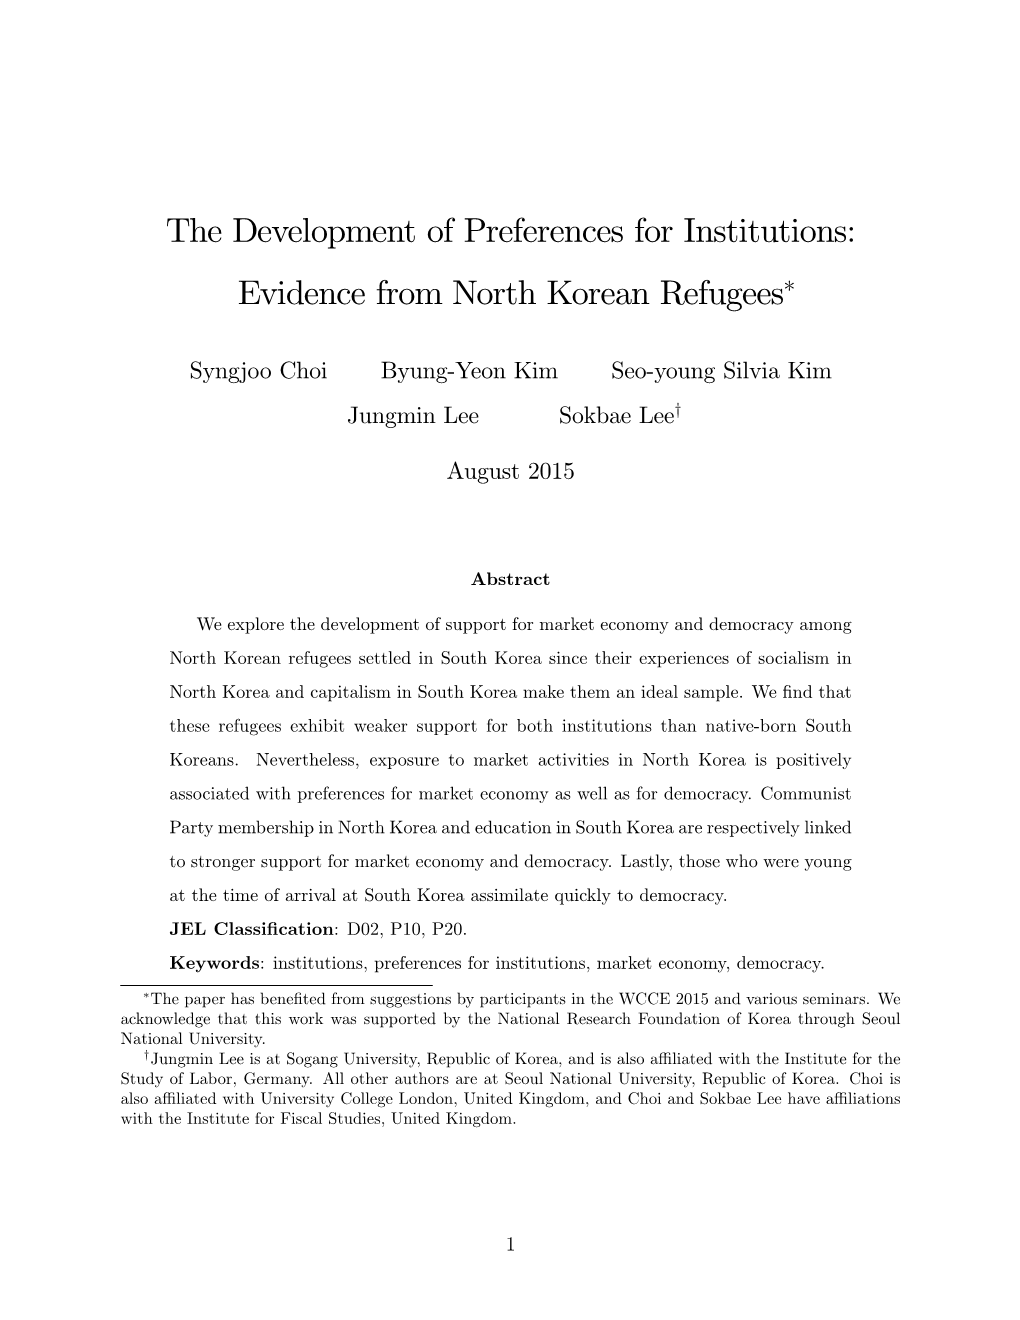 The Development of Preferences for Institutions: Evidence from North